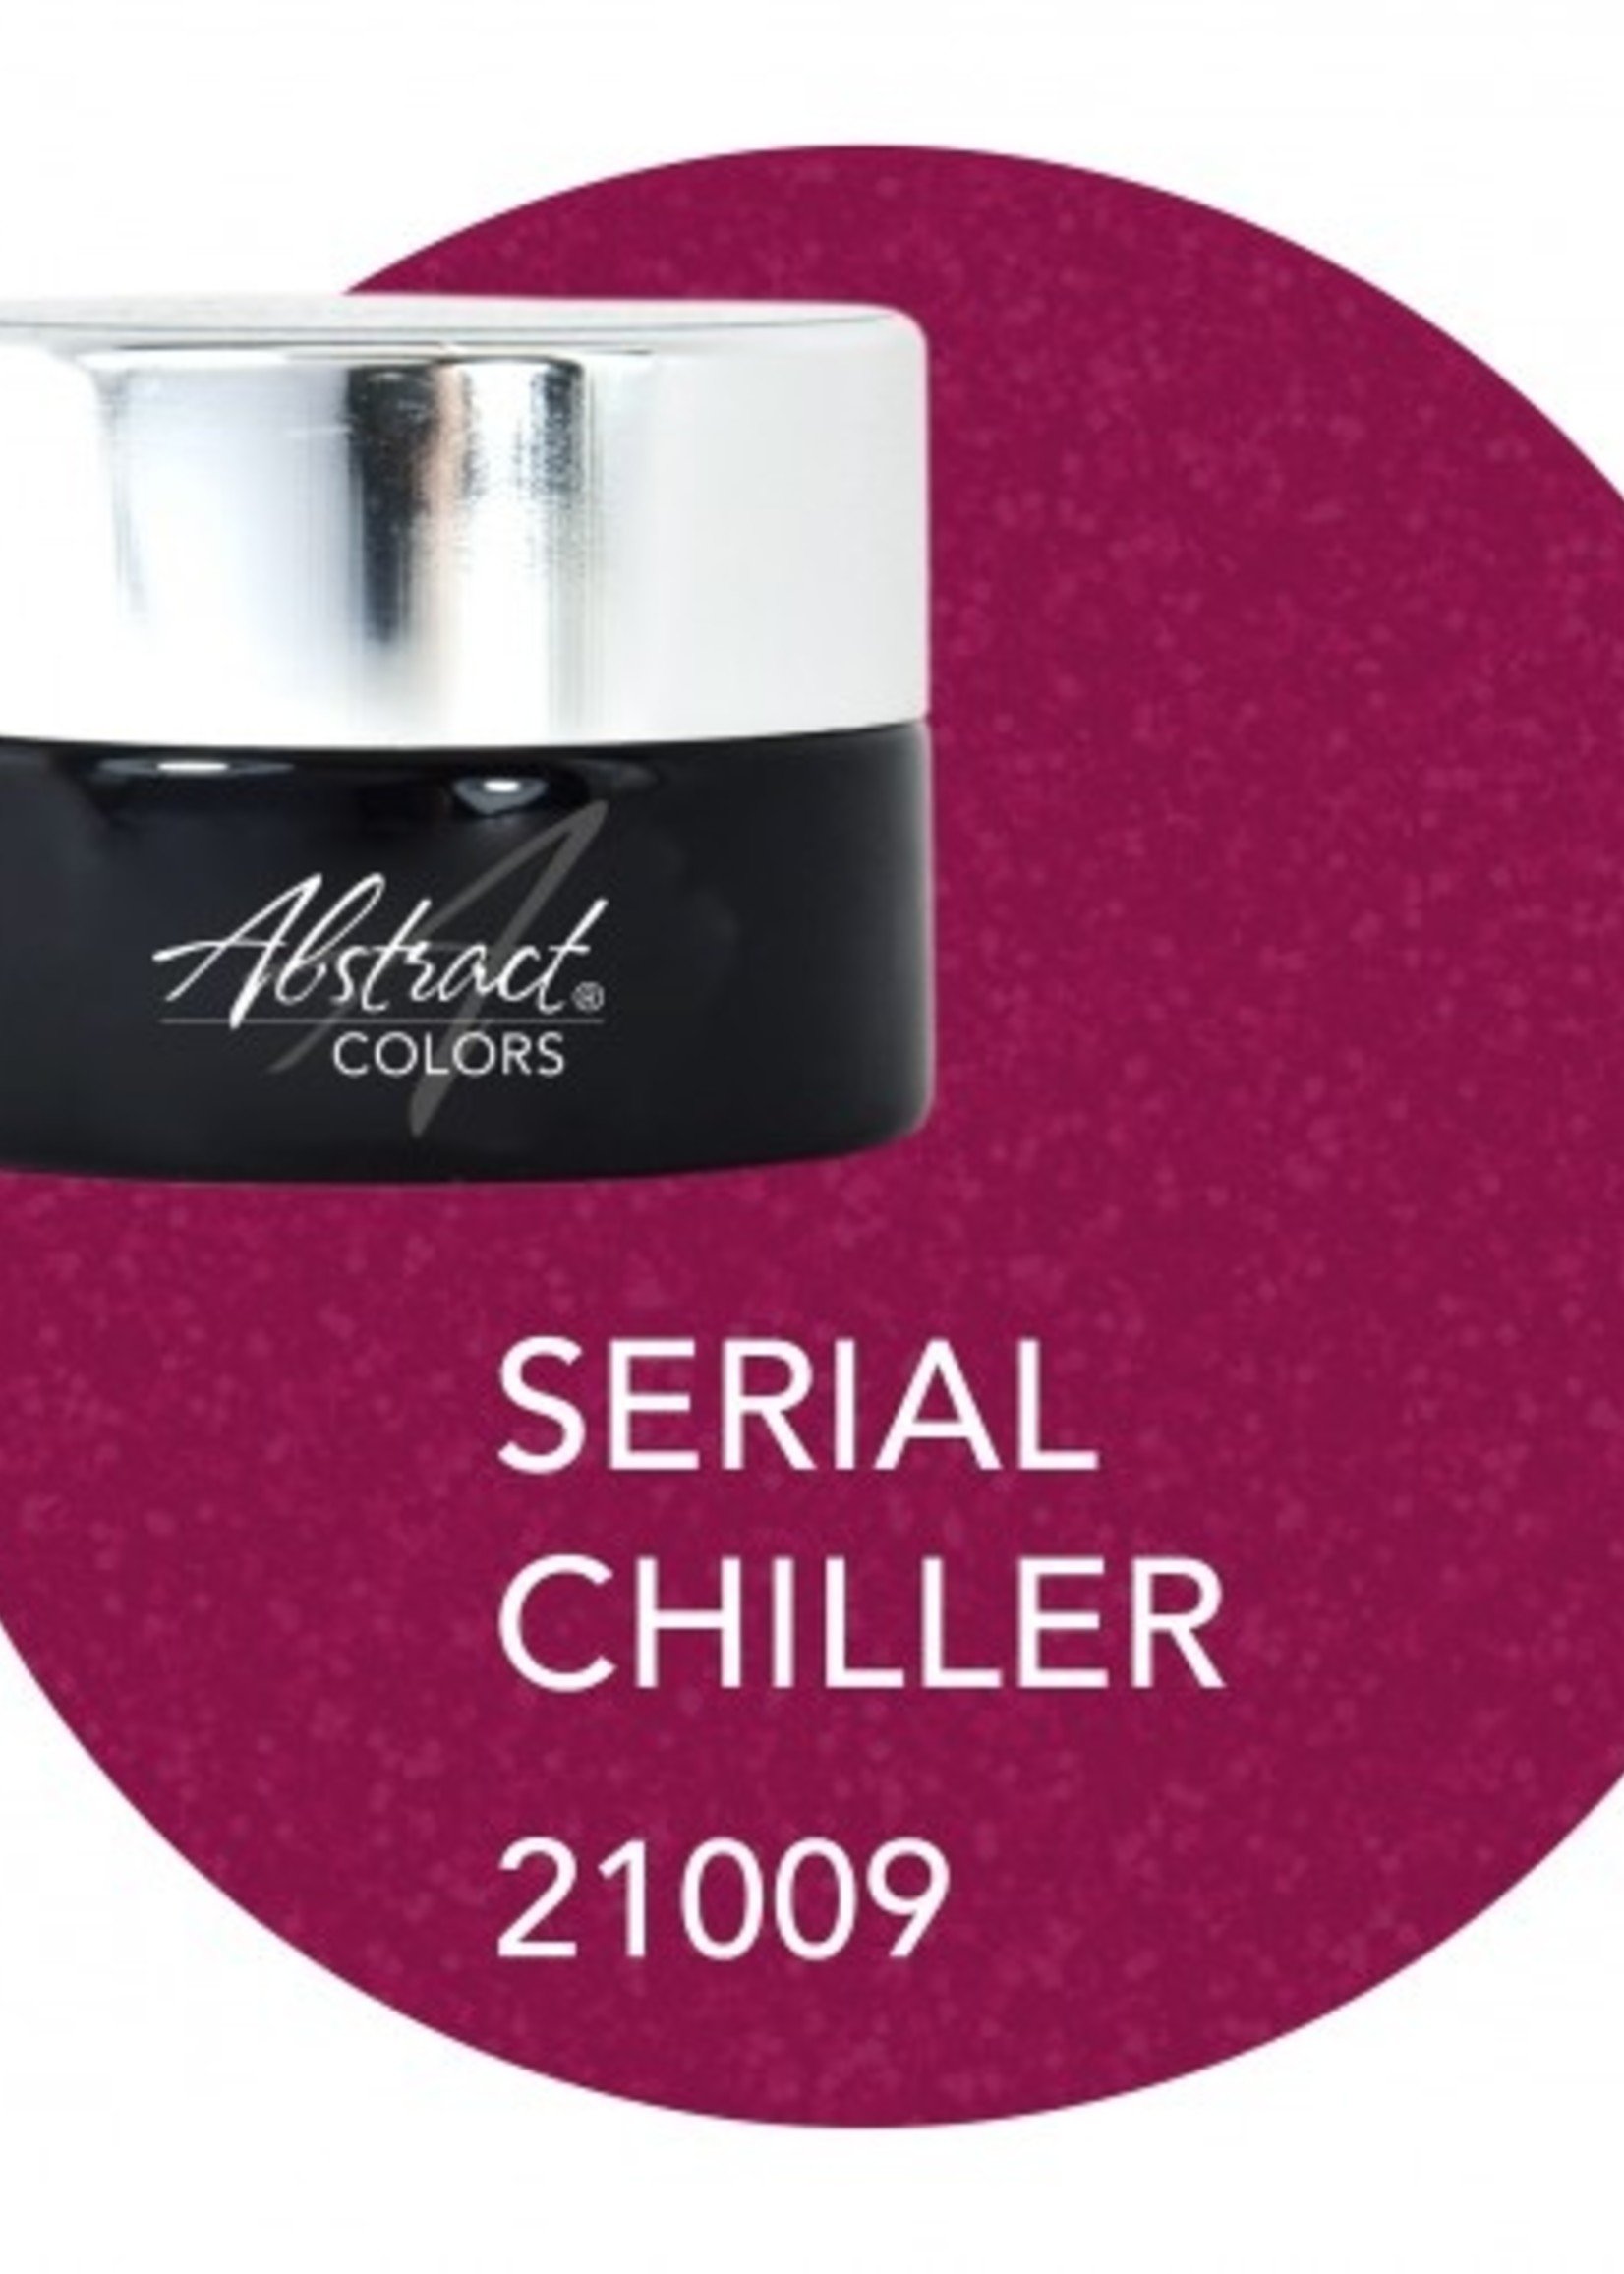 Abstract® Colorgel 5 ml Serial Chiller